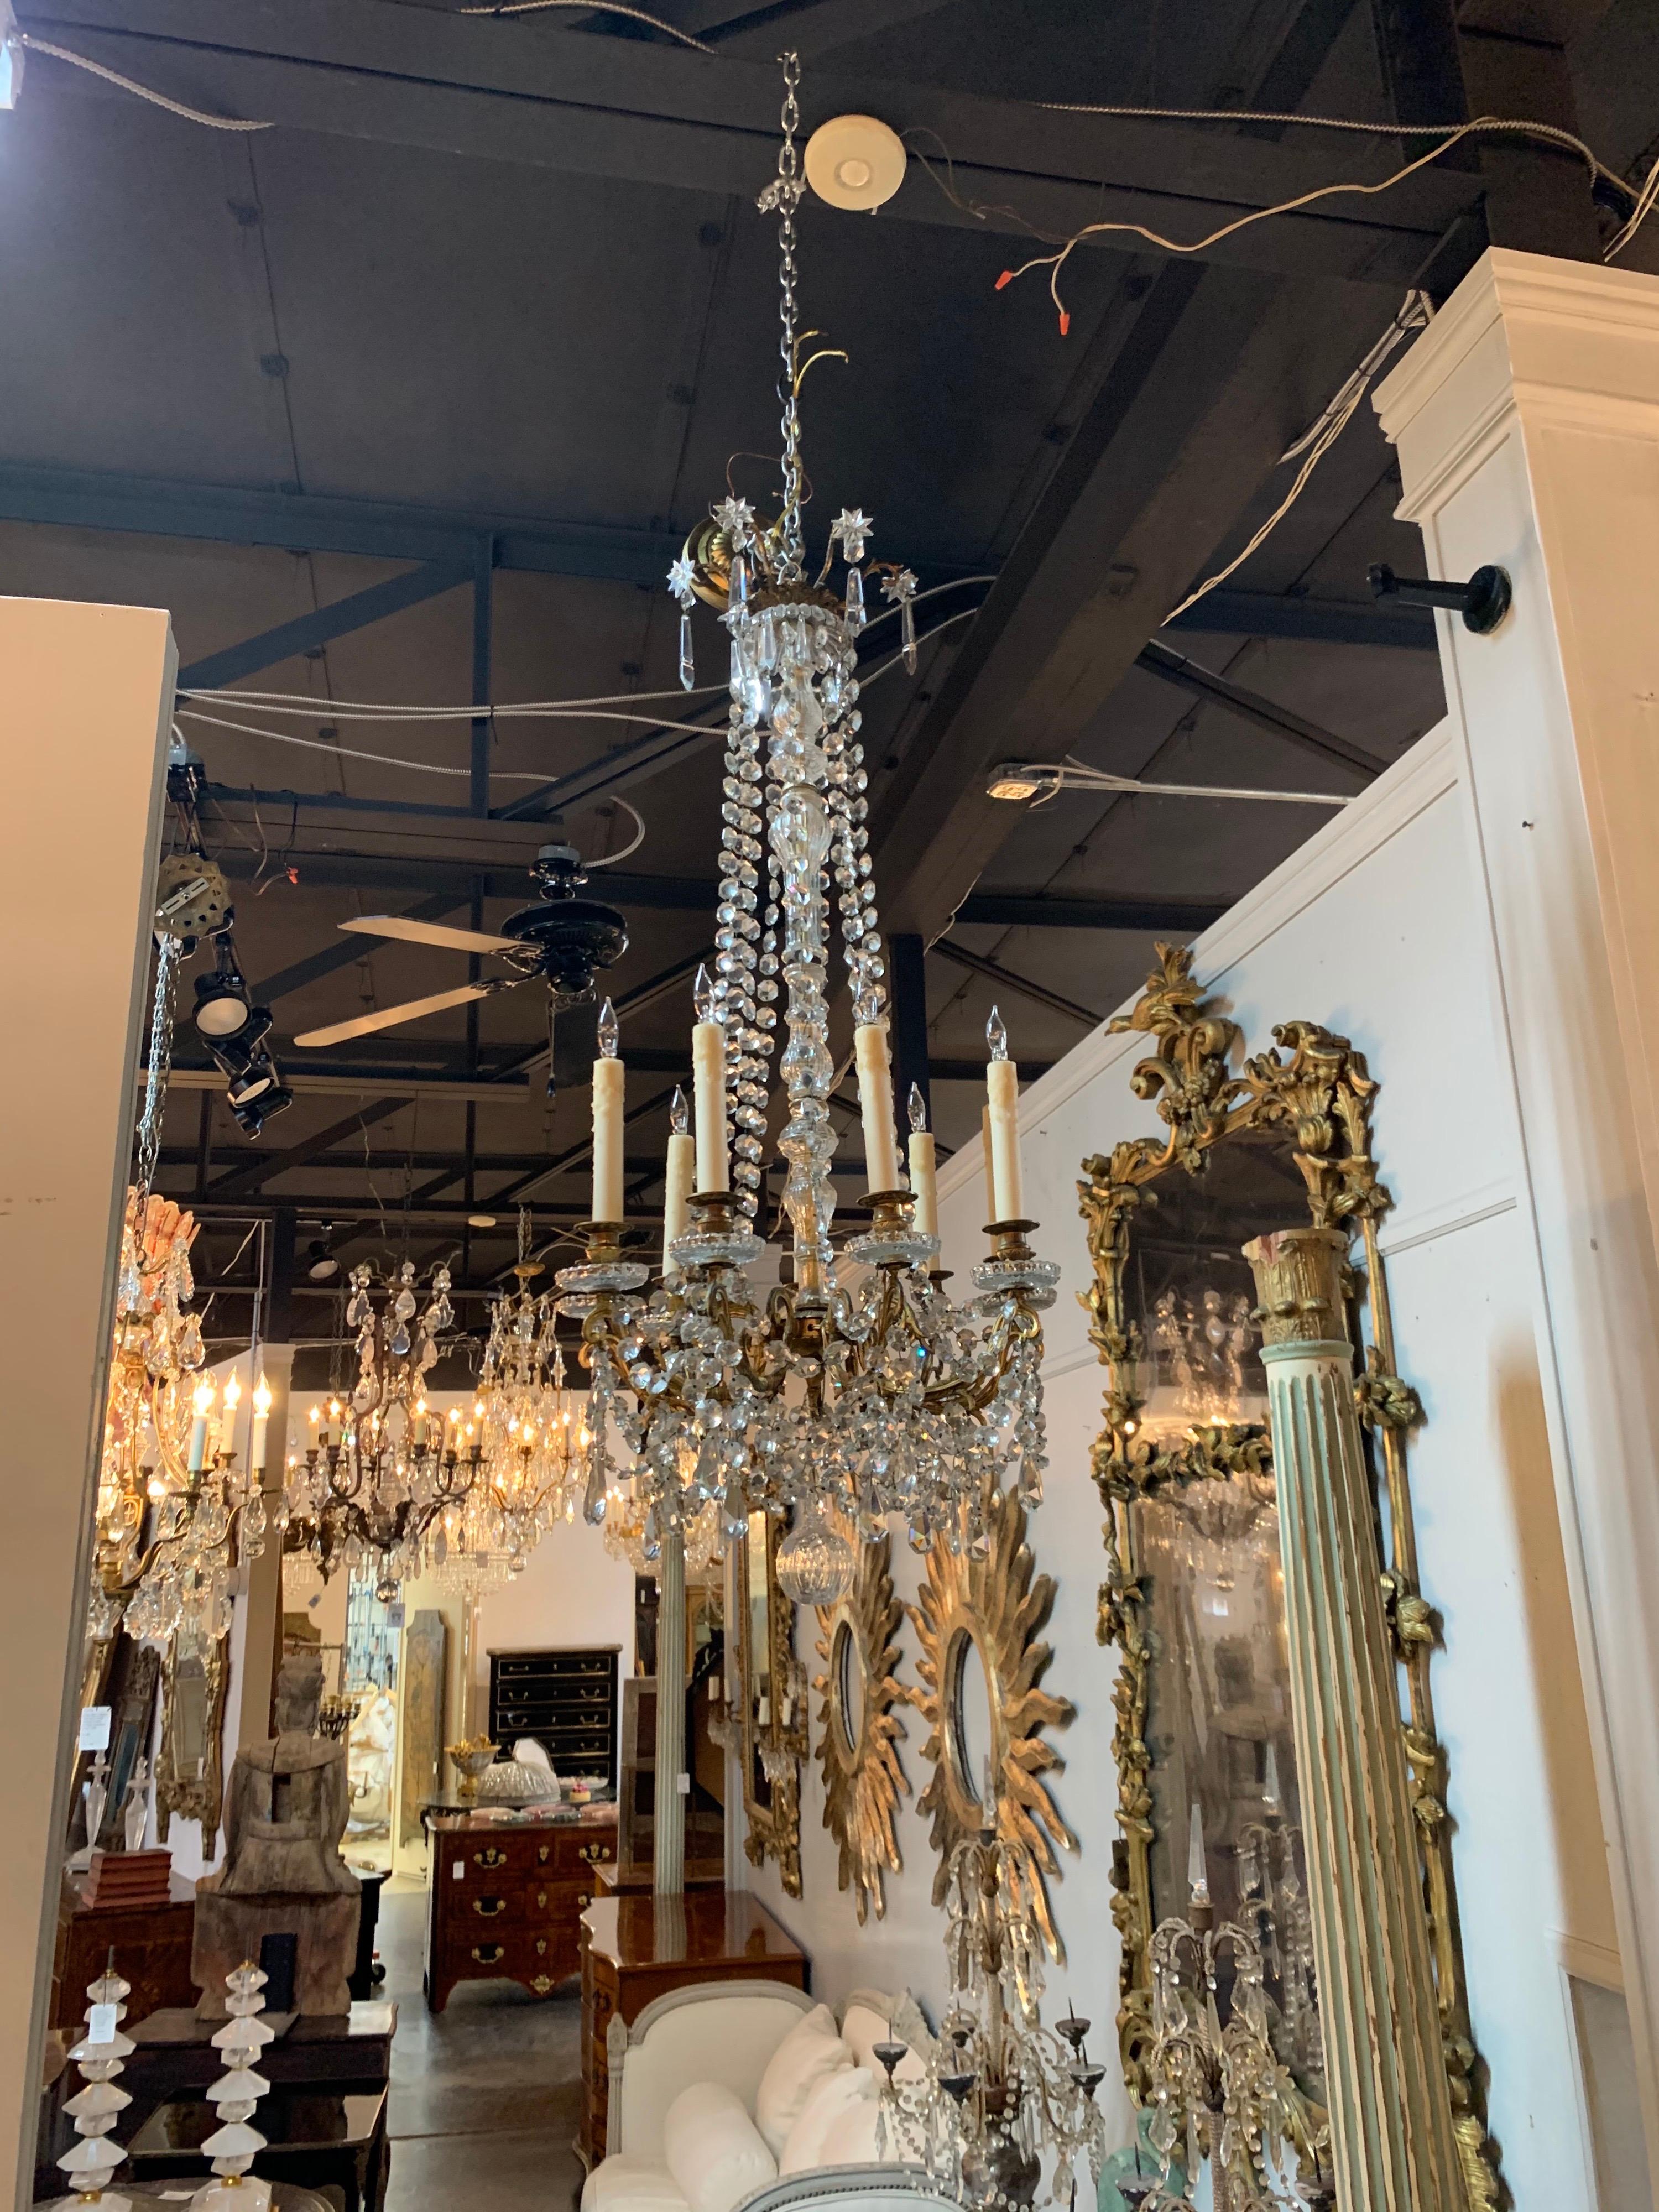 Fabulous 19th century French Baccarrat style gilt bronze and crystal chandelier with 9 lights. Beautiful glistening crystals and an elegant long and narrow shape. Stunning!